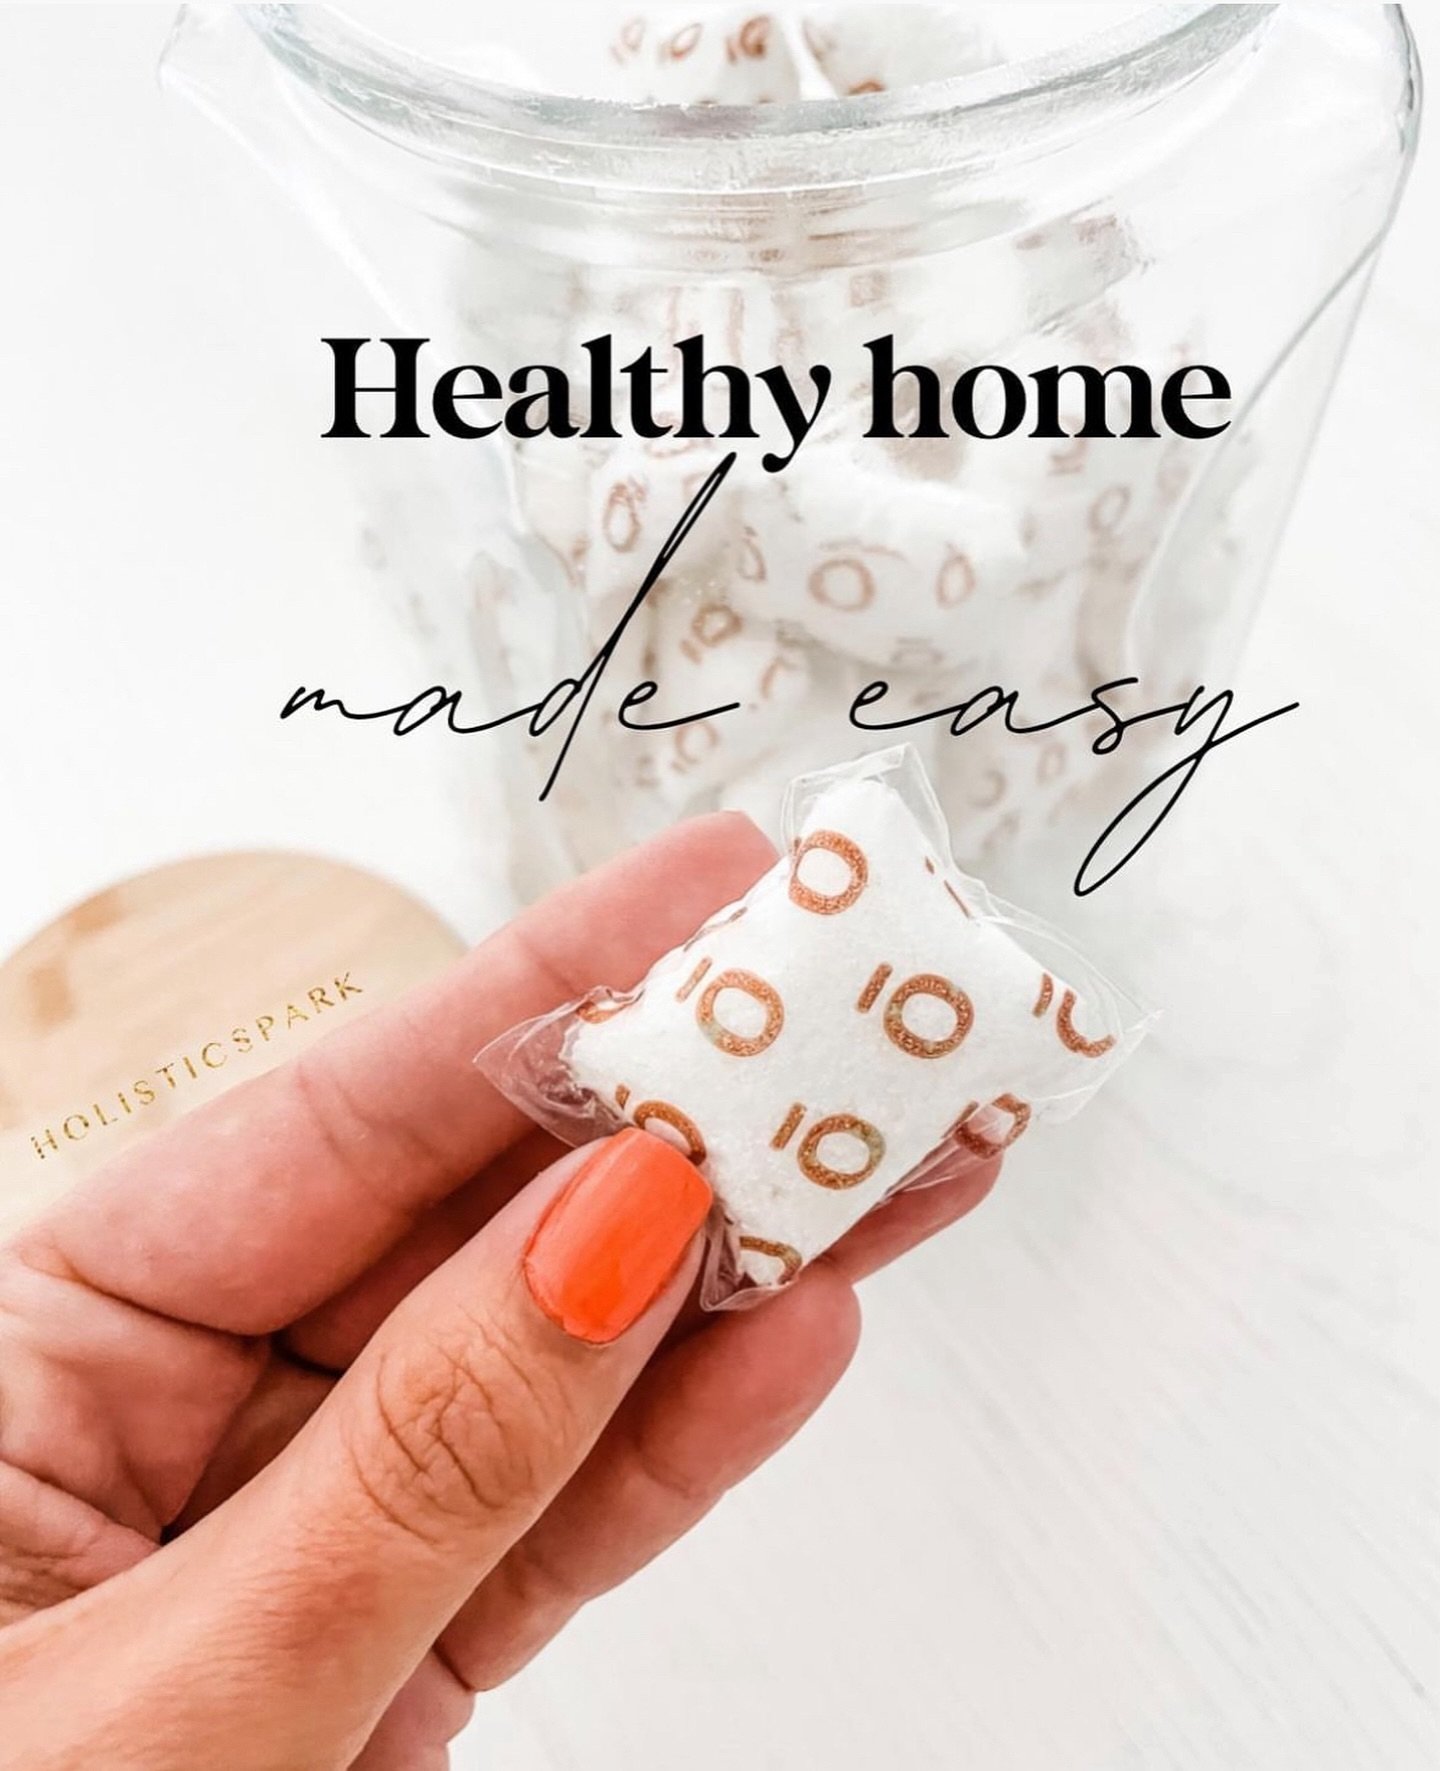 Did you know that having a cleaner, low tox home environment is pretty simple?

It&rsquo;s simple once you find a brand that consistent and performs as it should without all the sketchy toxic chemicals.

Reading labels on products before you purchase